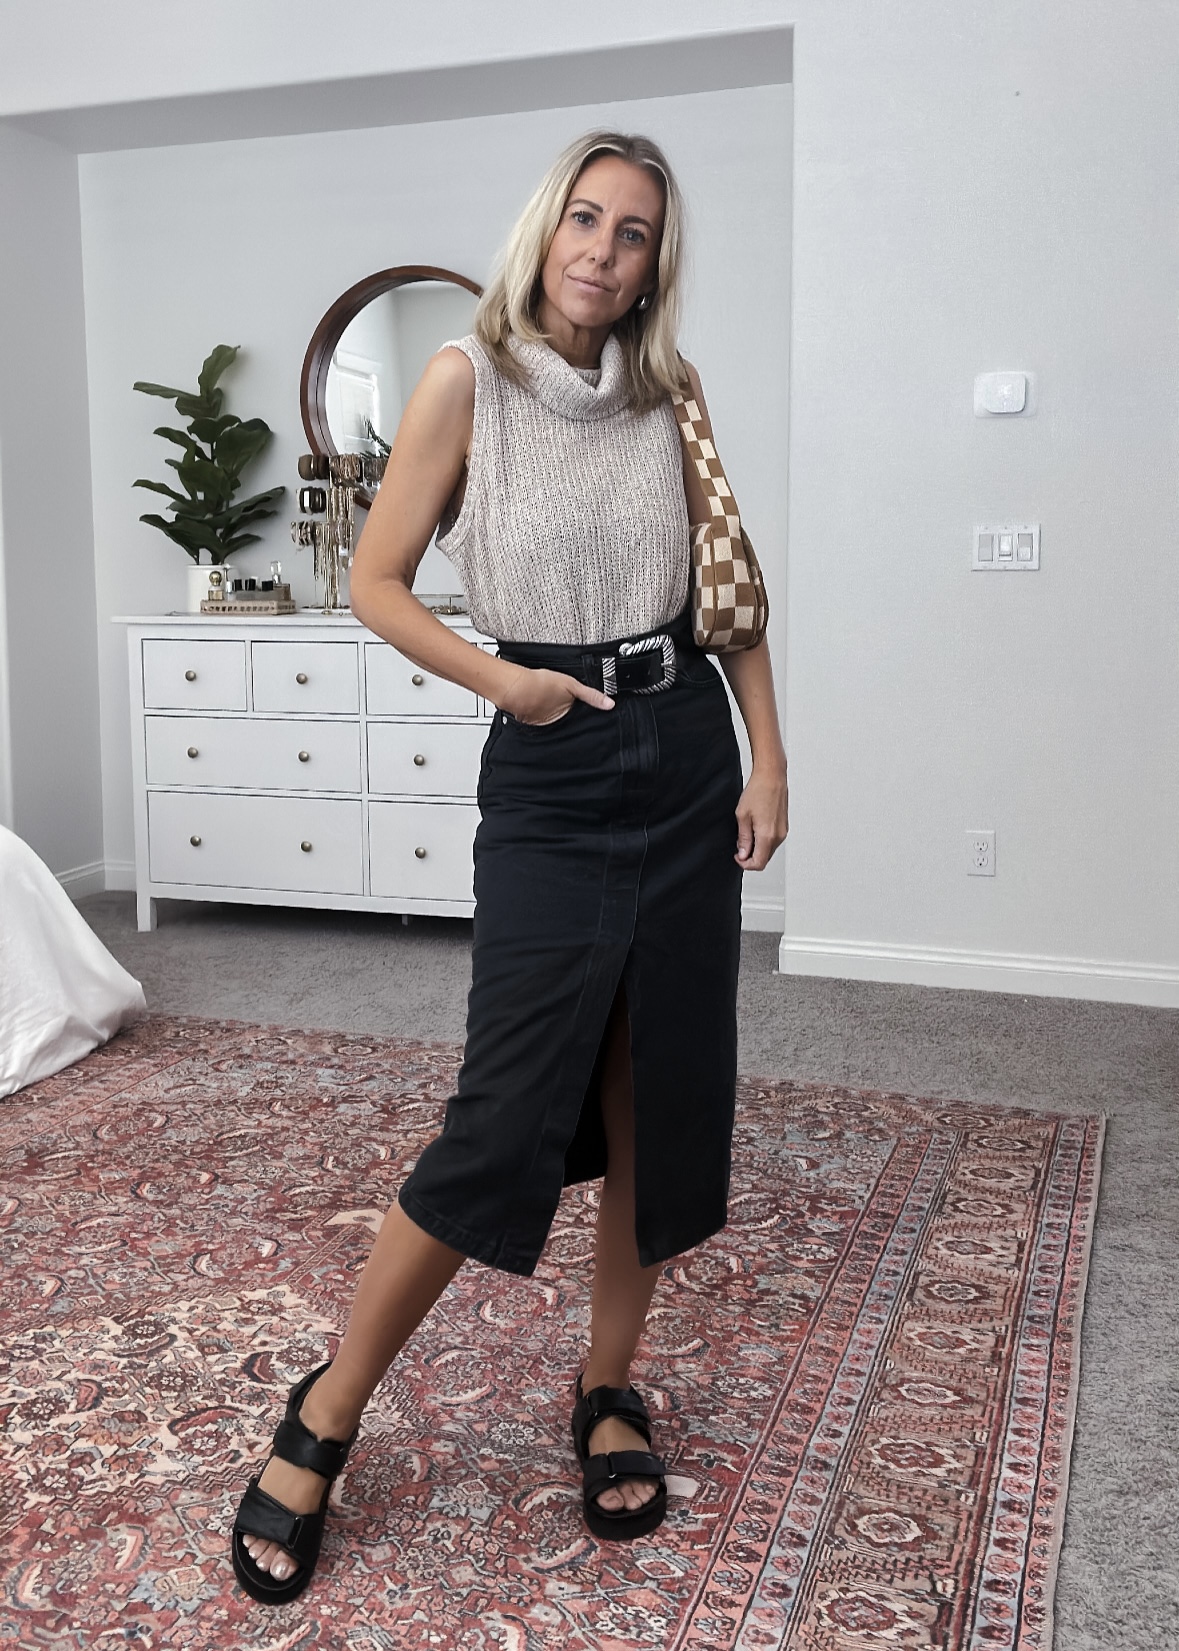 TRENDING NOW: The Dad Sandals + Easy Tips for Styling Them-Jaclyn De Leon style. One big trend for Spring and Summer is the dad sandals. There are a ton of easy outfits you can wear with these sandals. I love to pair them with dresses, skirts, and pants.